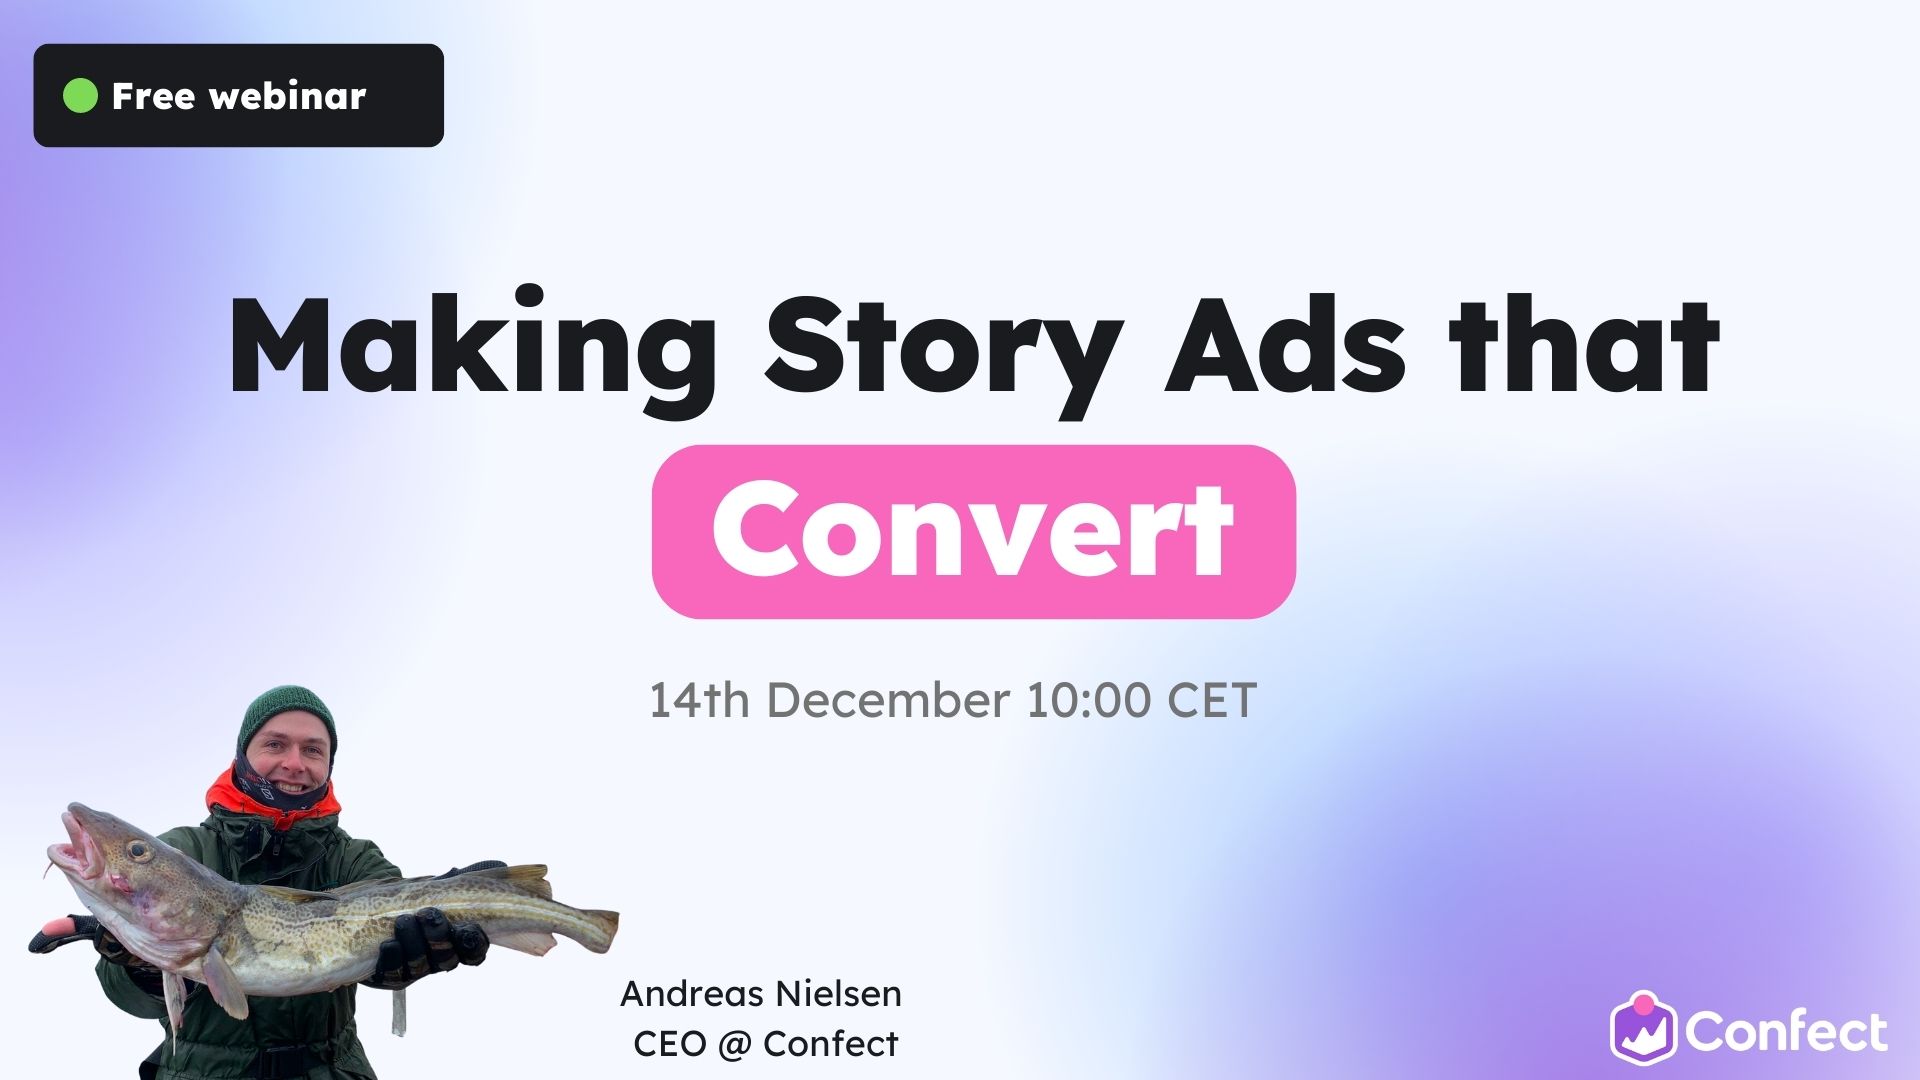 Story ads that convert